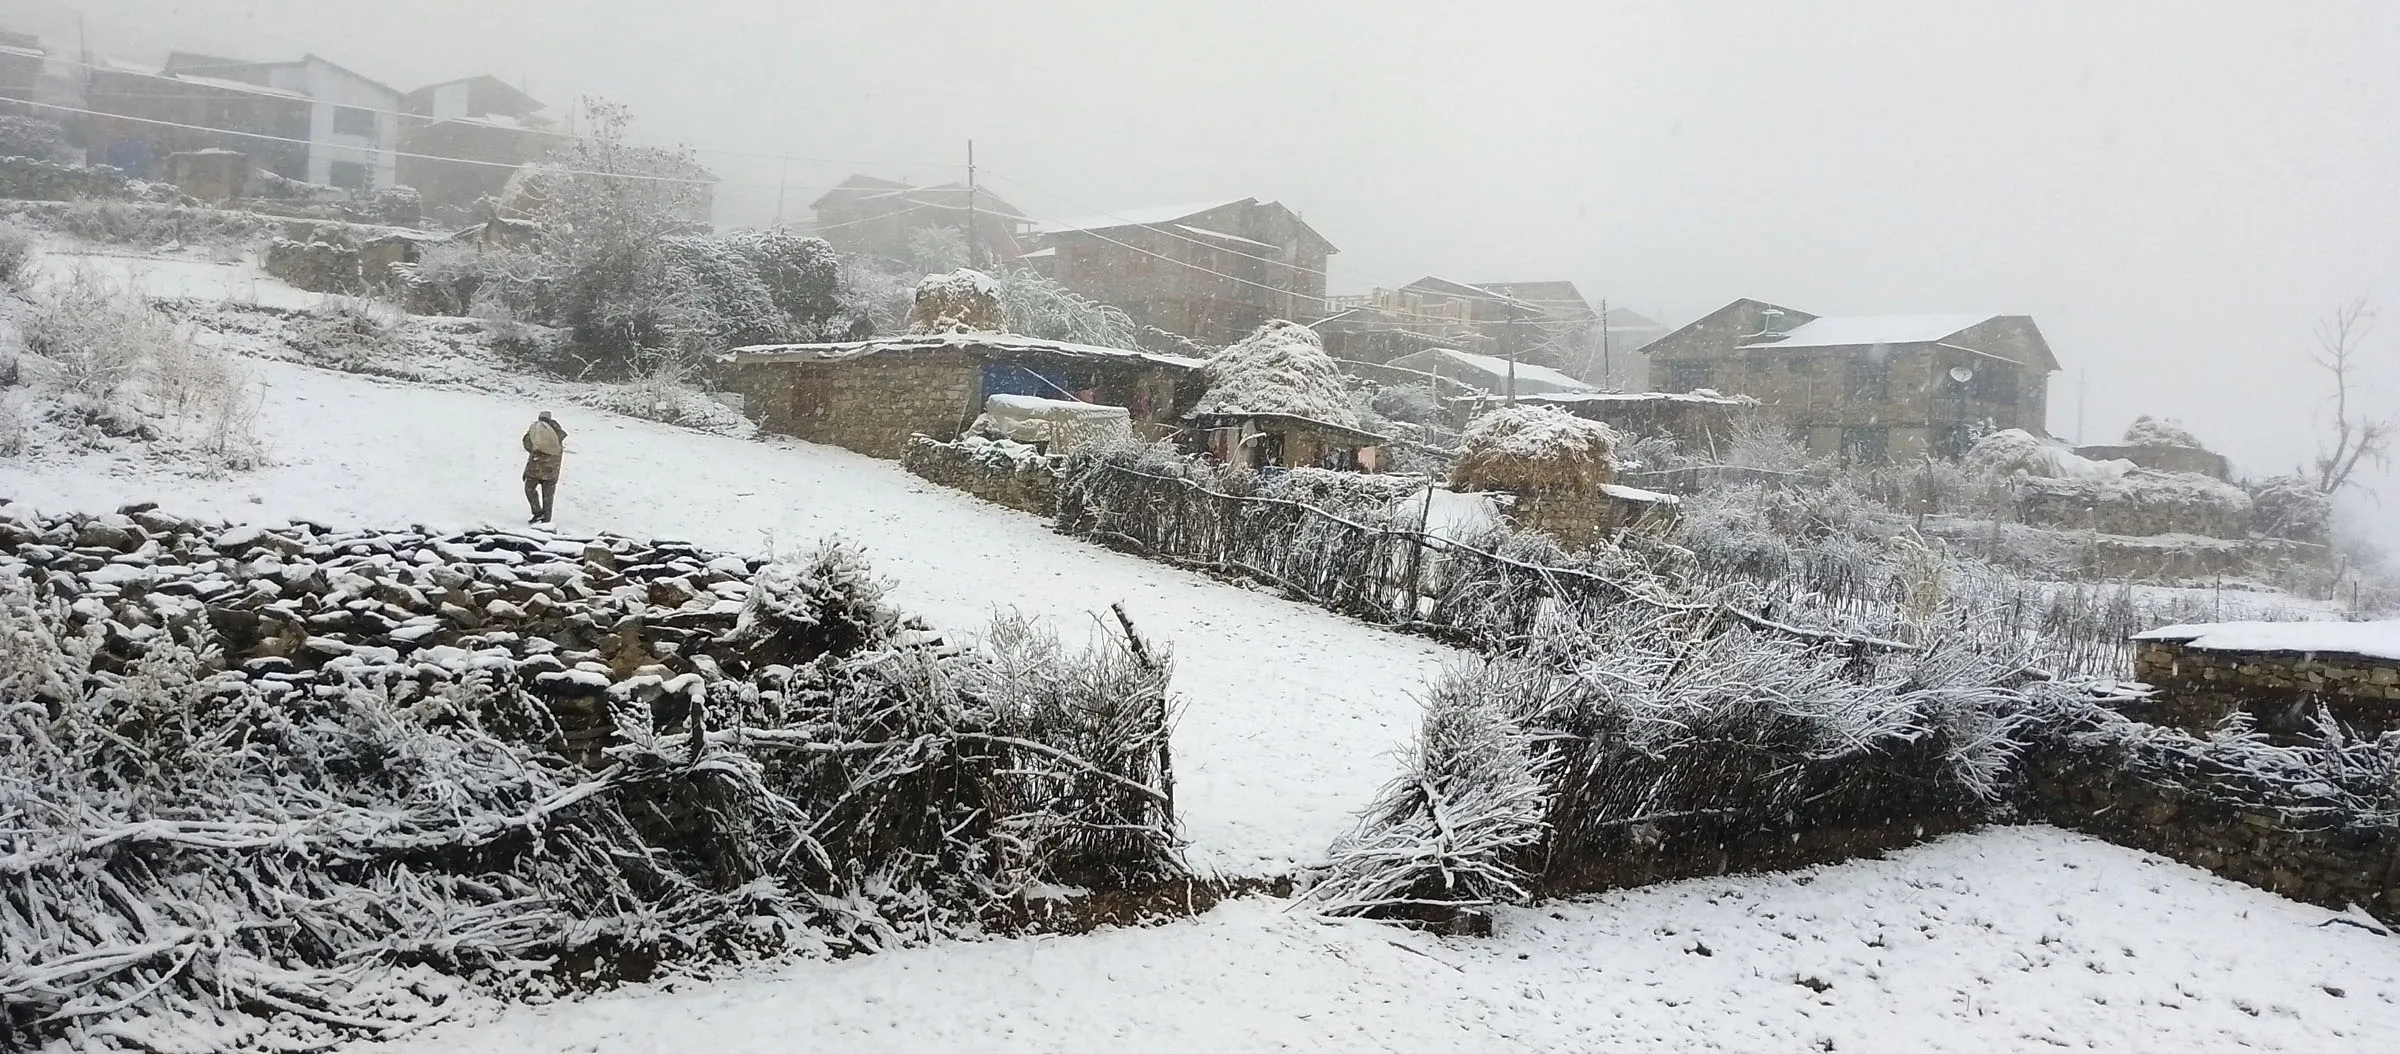 Snowfall in Humla makes life difficult for residents